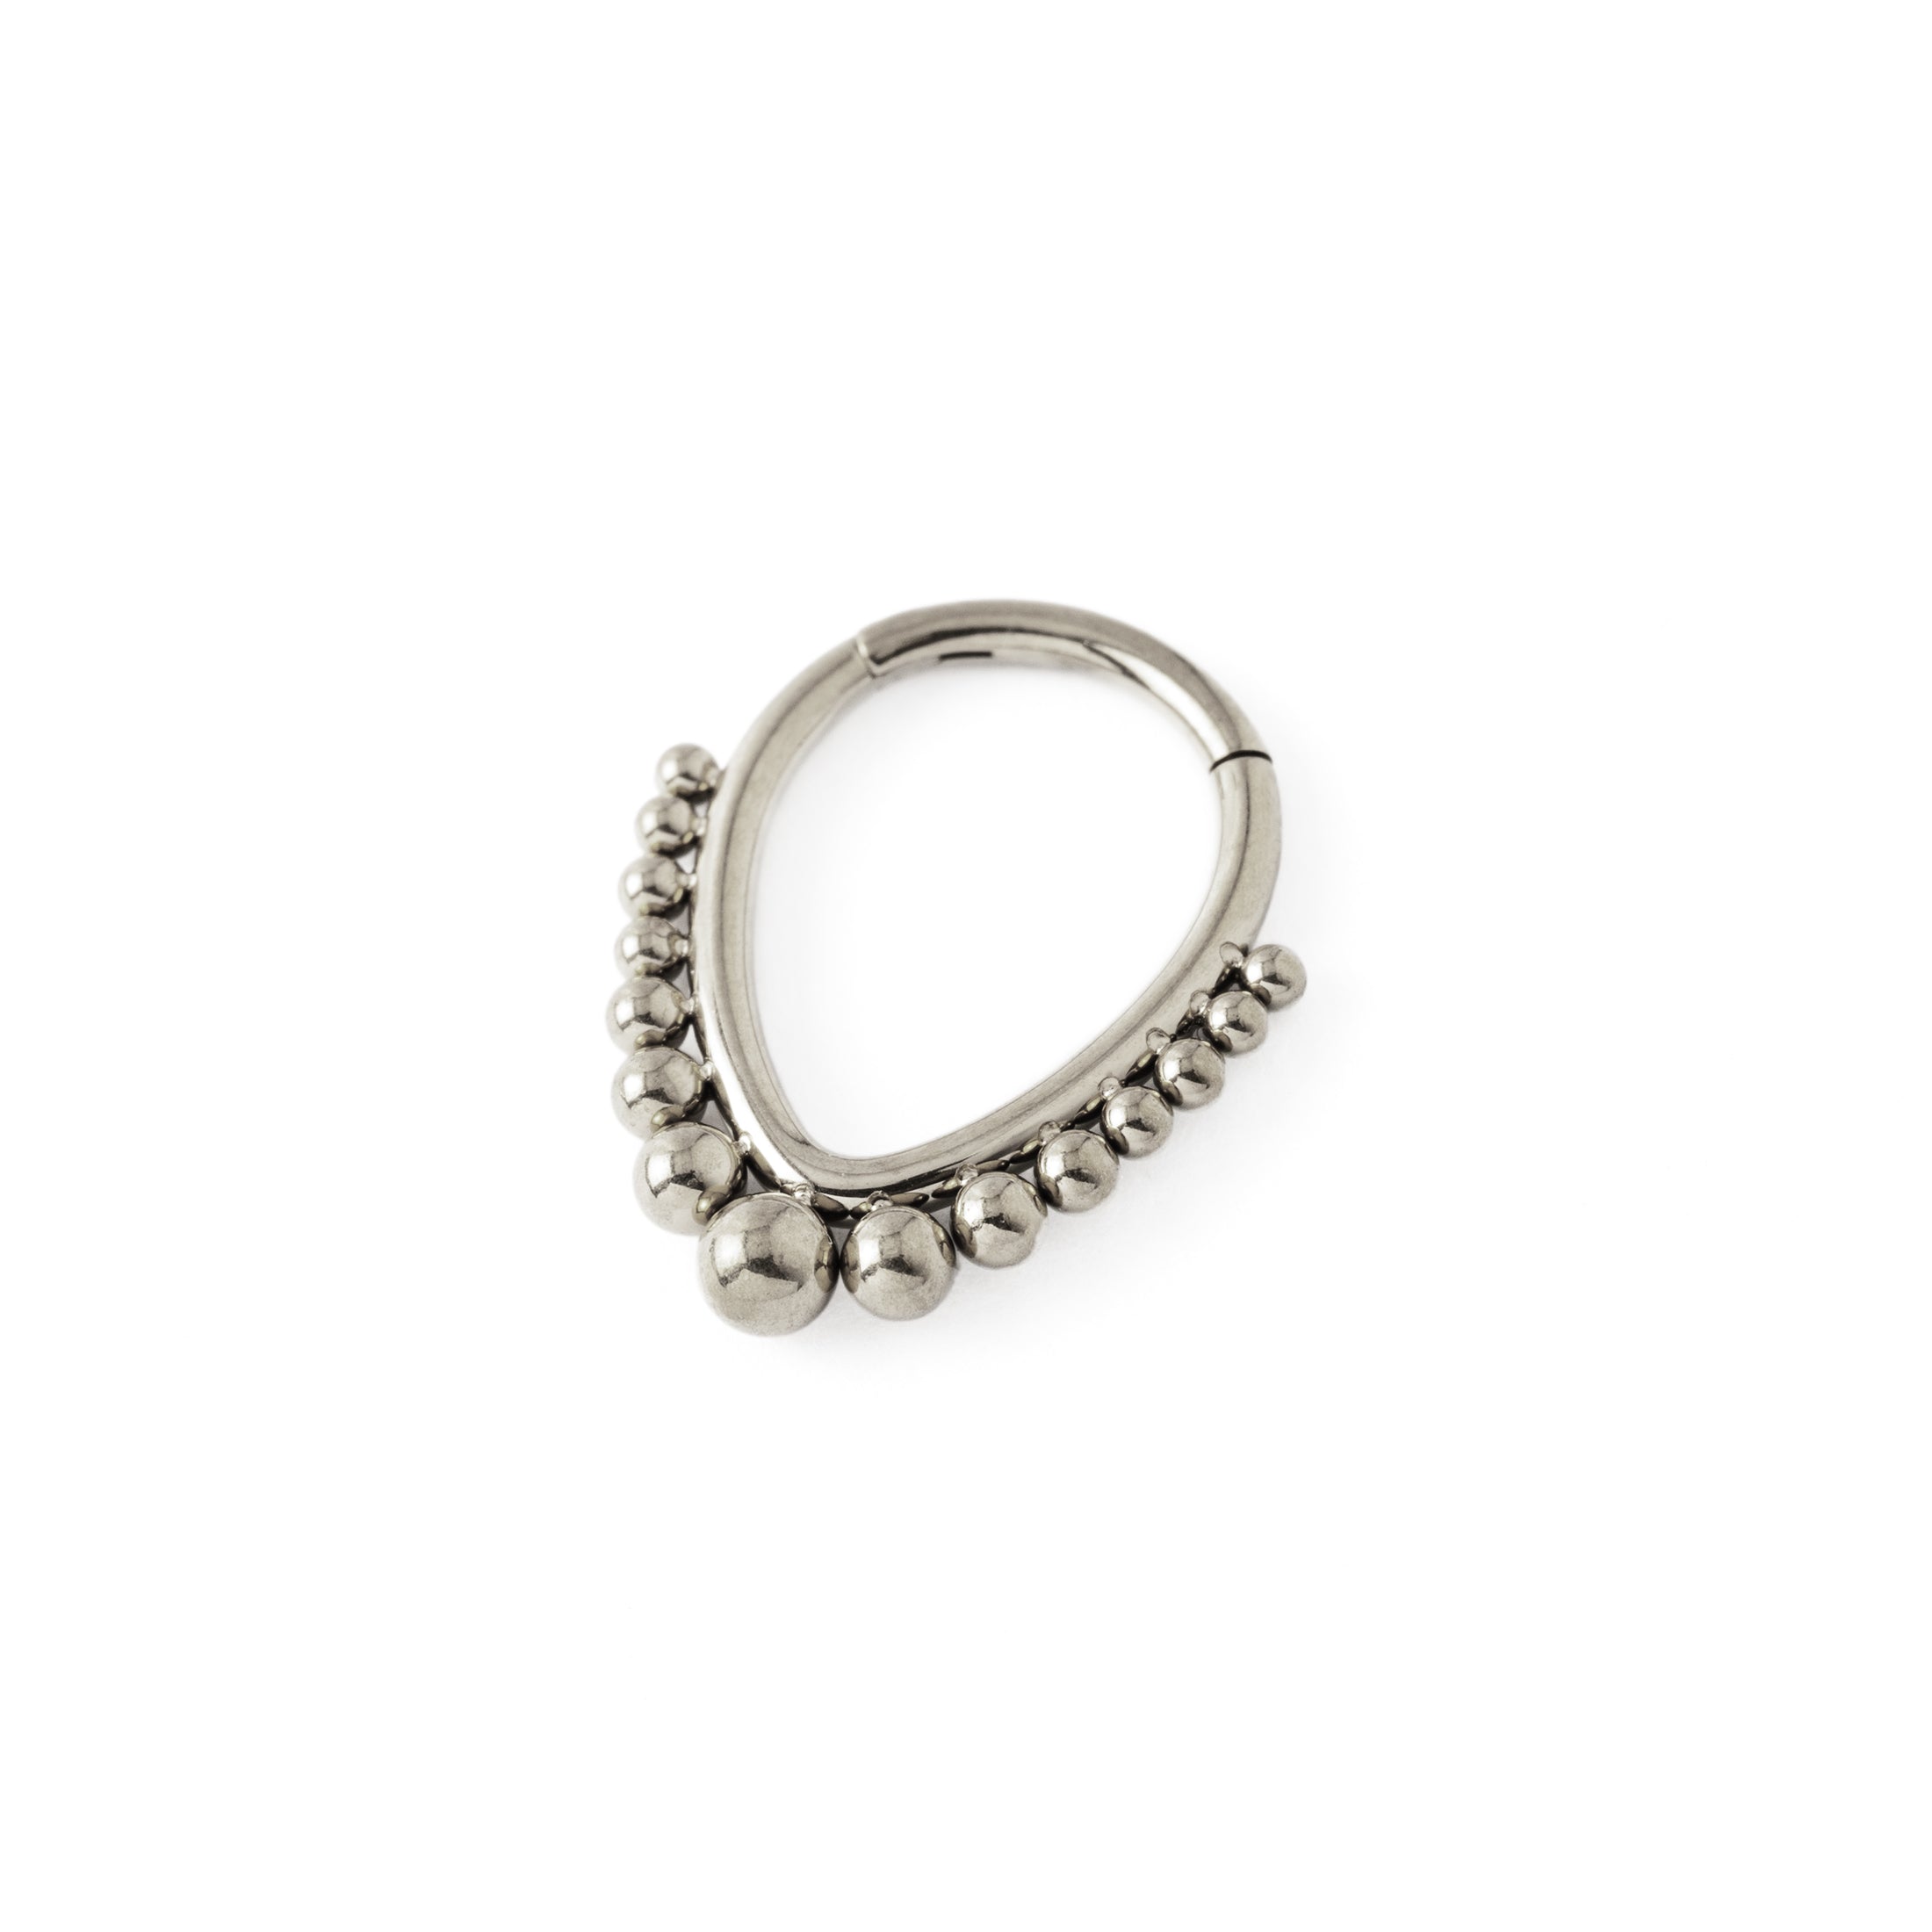 Althea Teardrop surgical steel Septum Clicker ring right side view